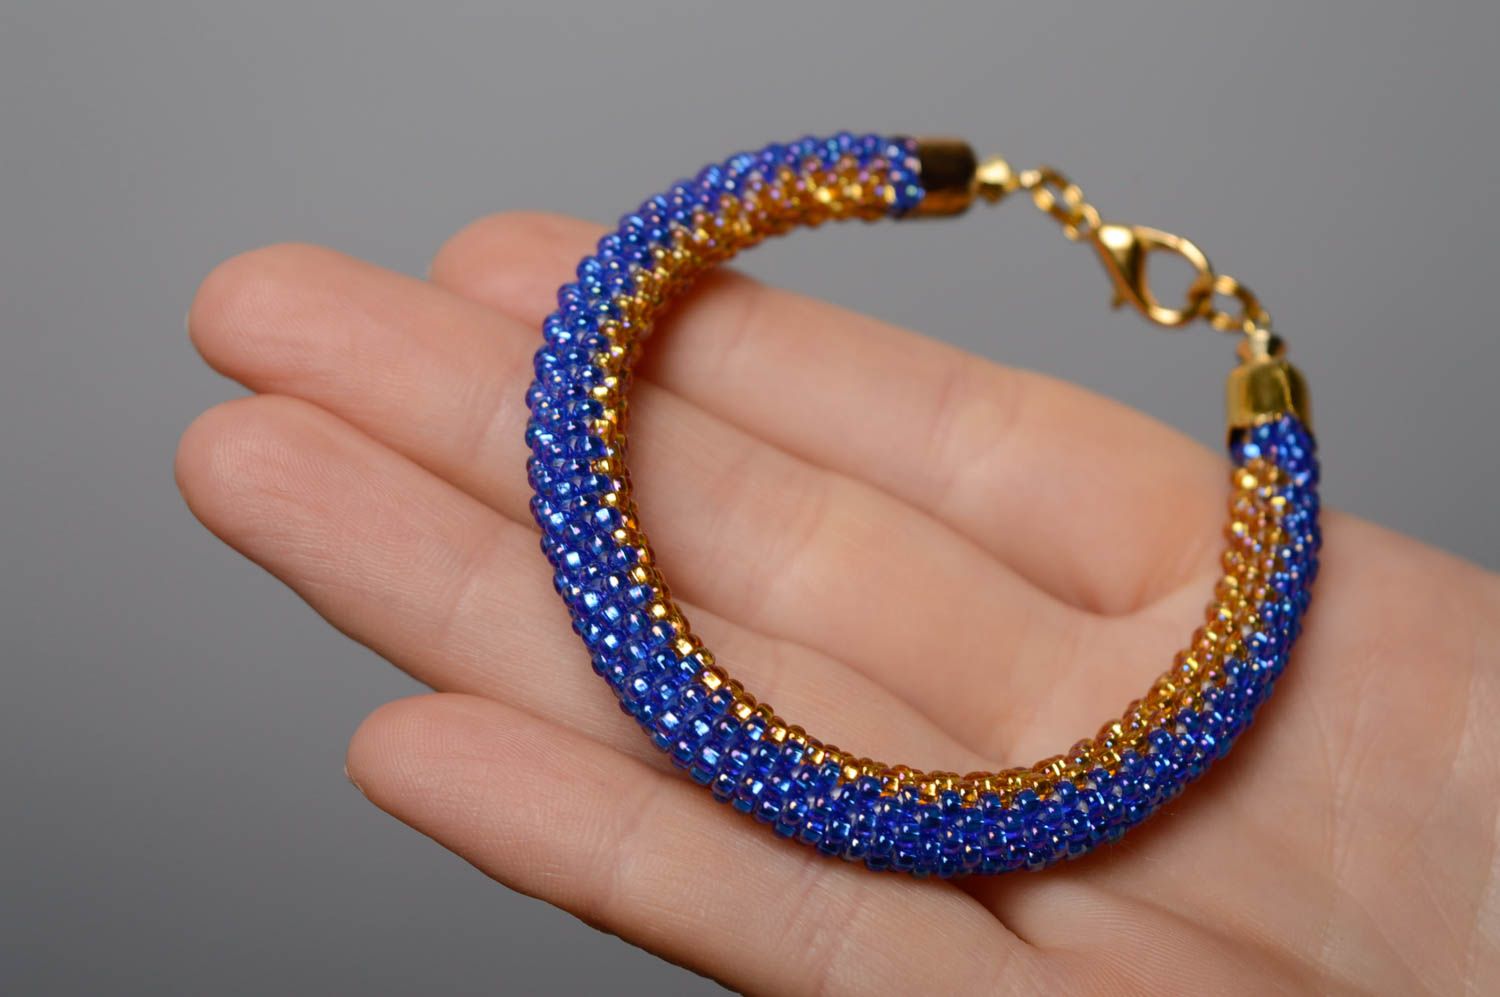 Handmade blue and gold color beads adjustable cord bracelet for women photo 4